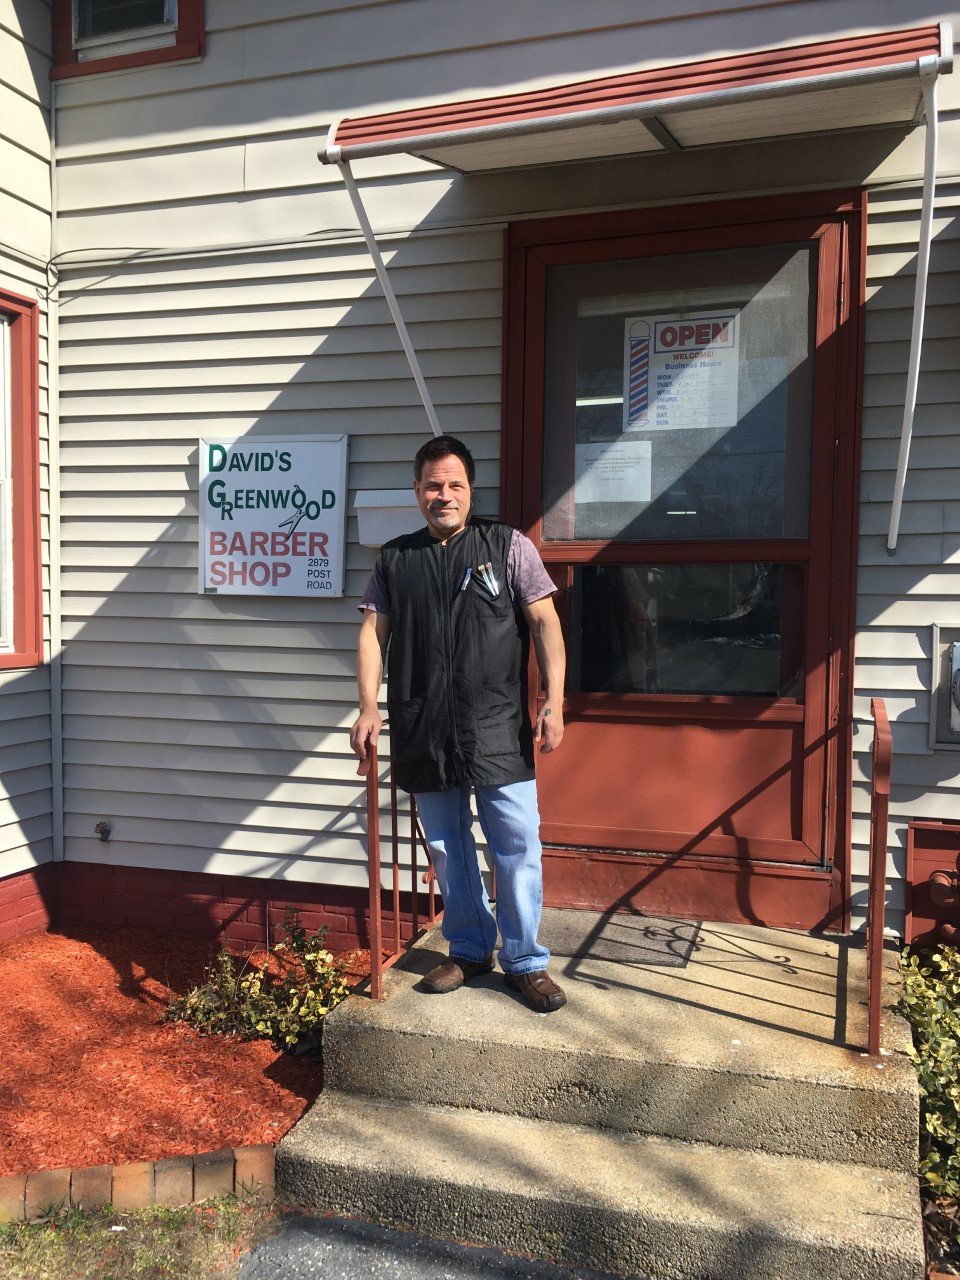 Meet David Picozzi, the longtime owner of David’s Greenwood Barber Shop in Warwick, come see what nearly 26 years of business looks like and get the perfect cut for spring.